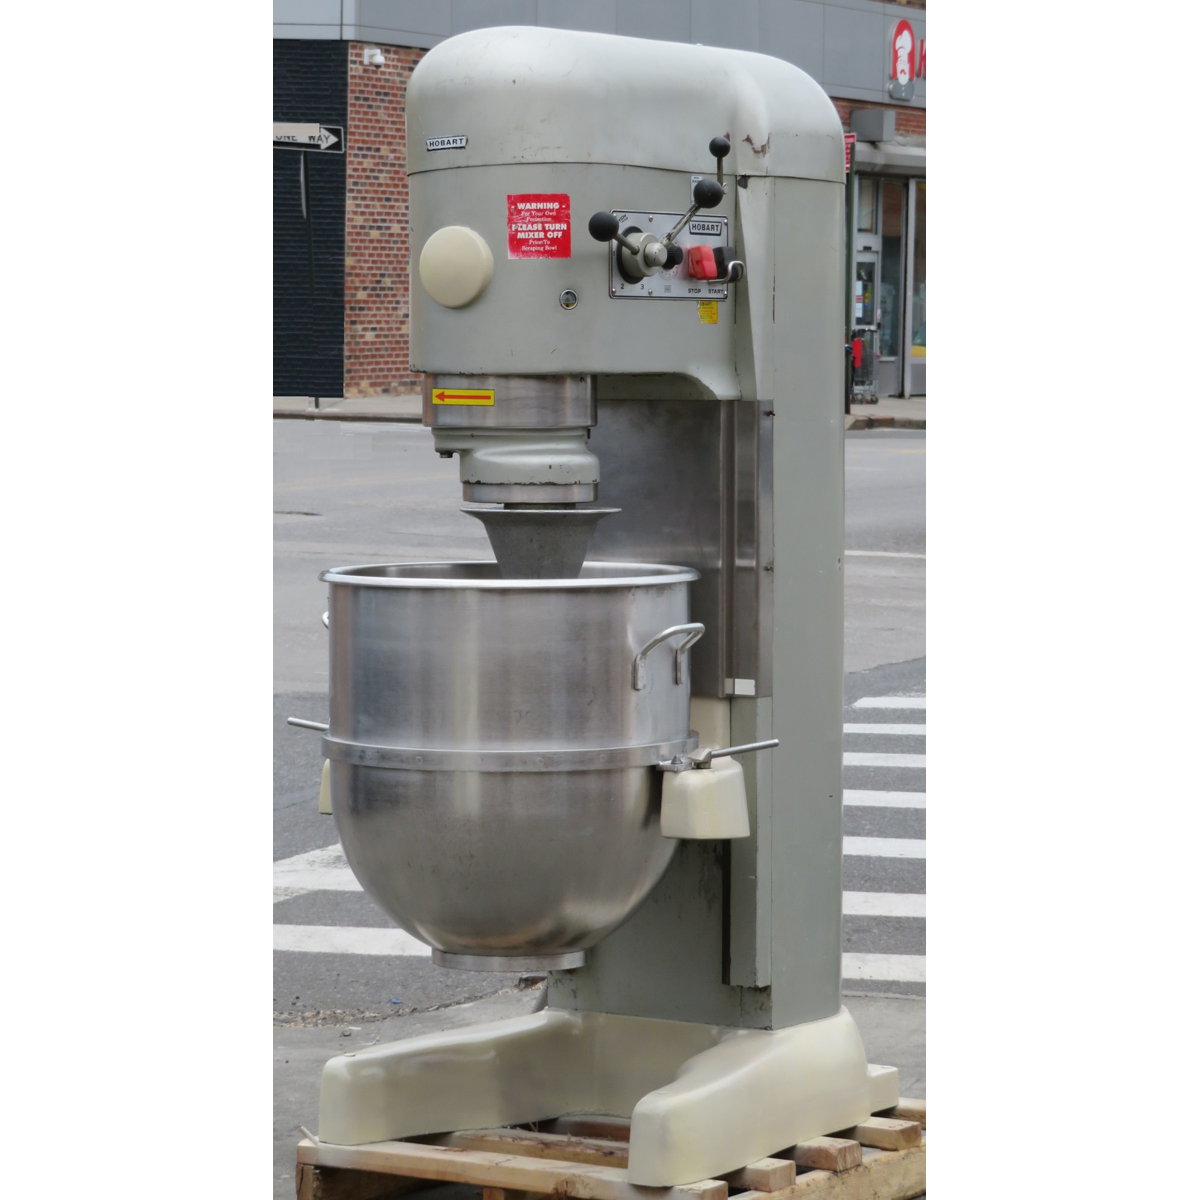 Hobart 140 Quart V1401 Mixer with Bowl, Used Great Condition